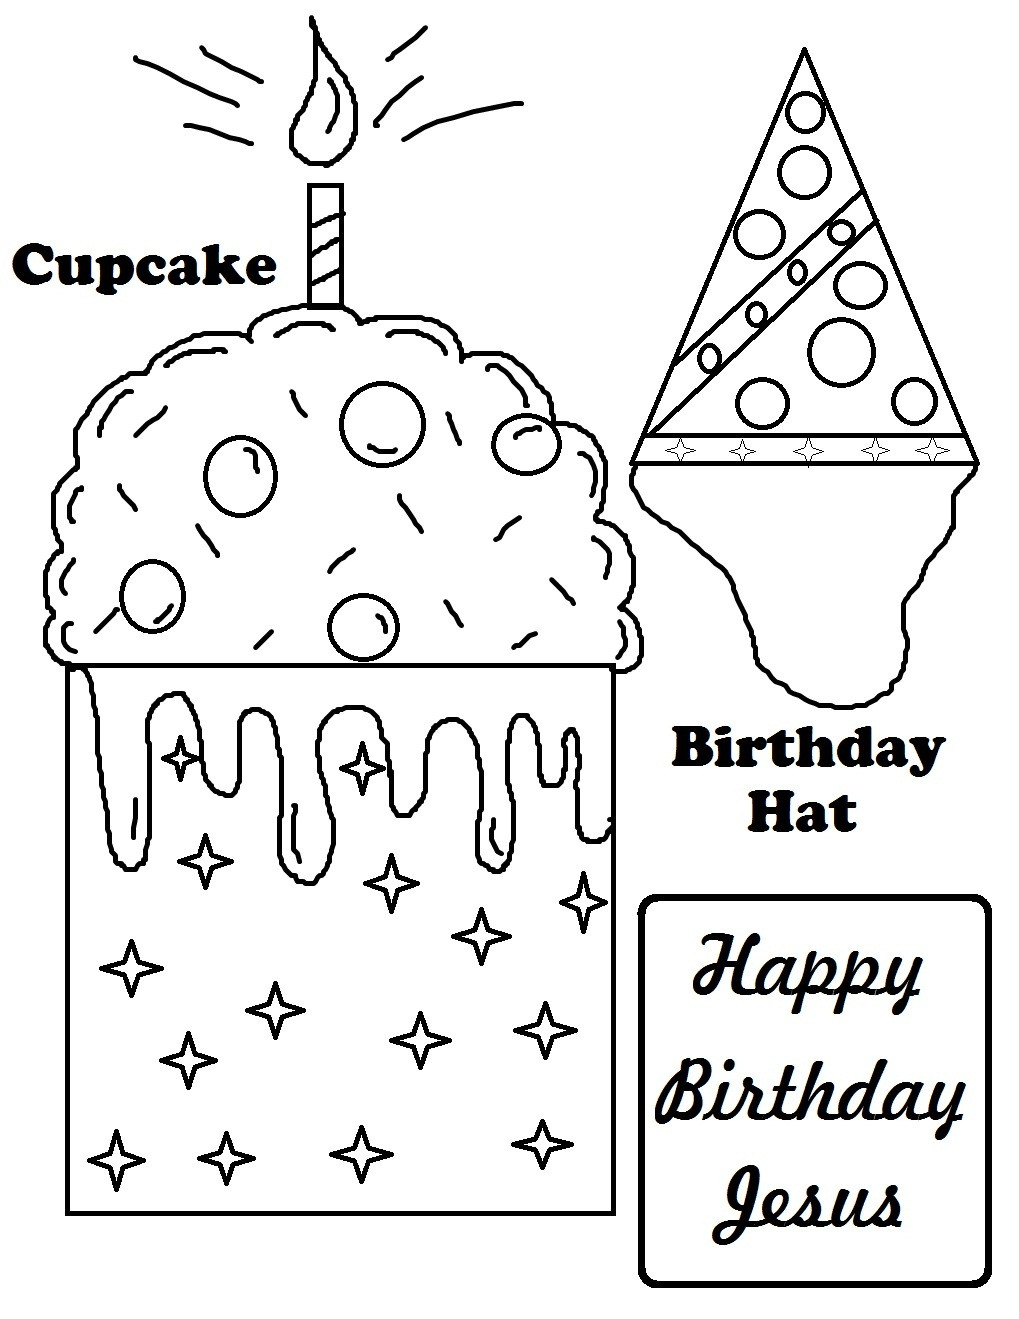 Free Printable Happy Birthday Coloring Pages
 Coloring Pages With Quotes About Happiness QuotesGram